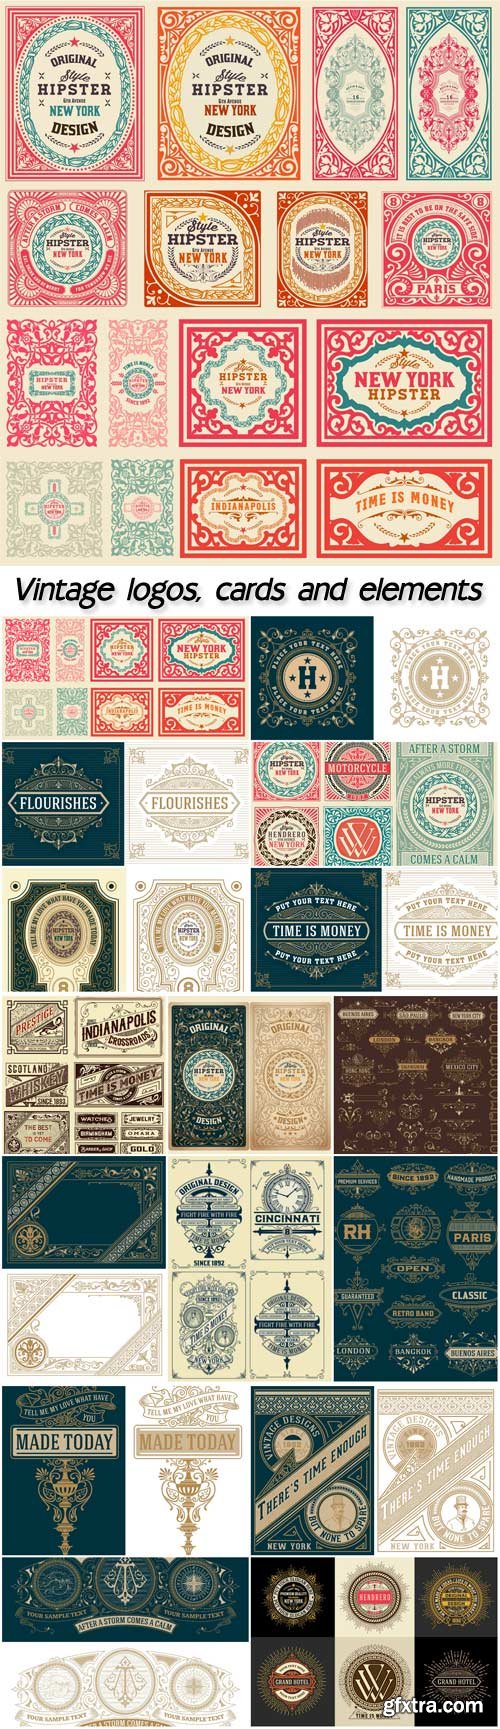 Vintage logos, cards and elements, floral ornaments, vector templates